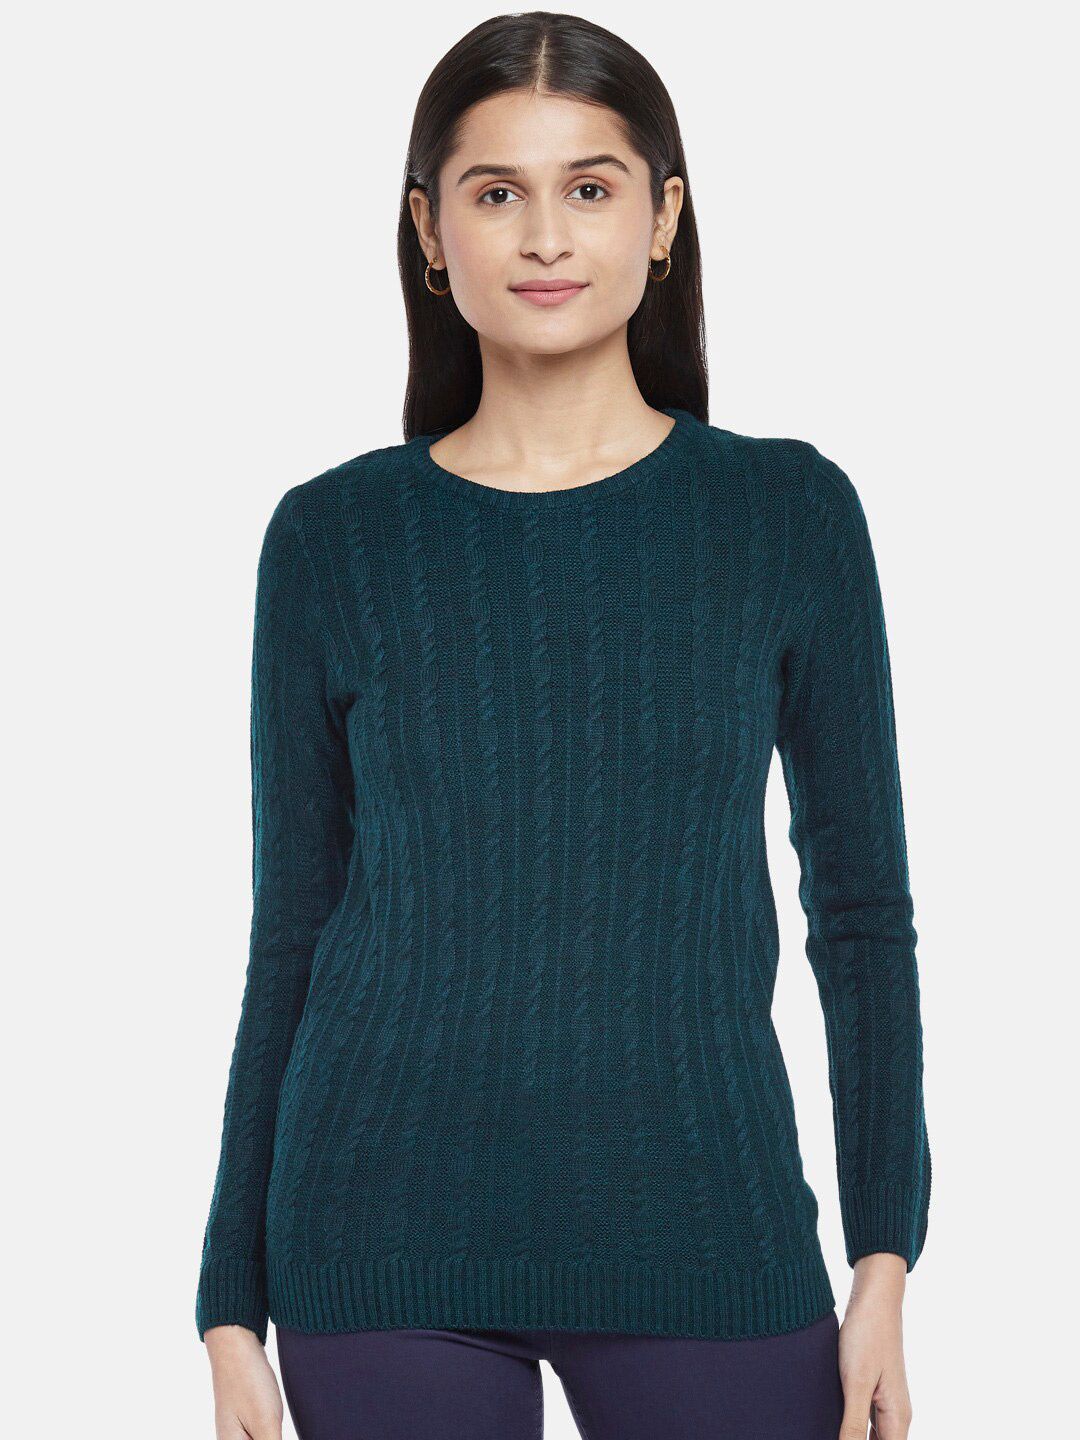 Honey by Pantaloons Women Teal Cable Knit Acrylic Pullover Price in India